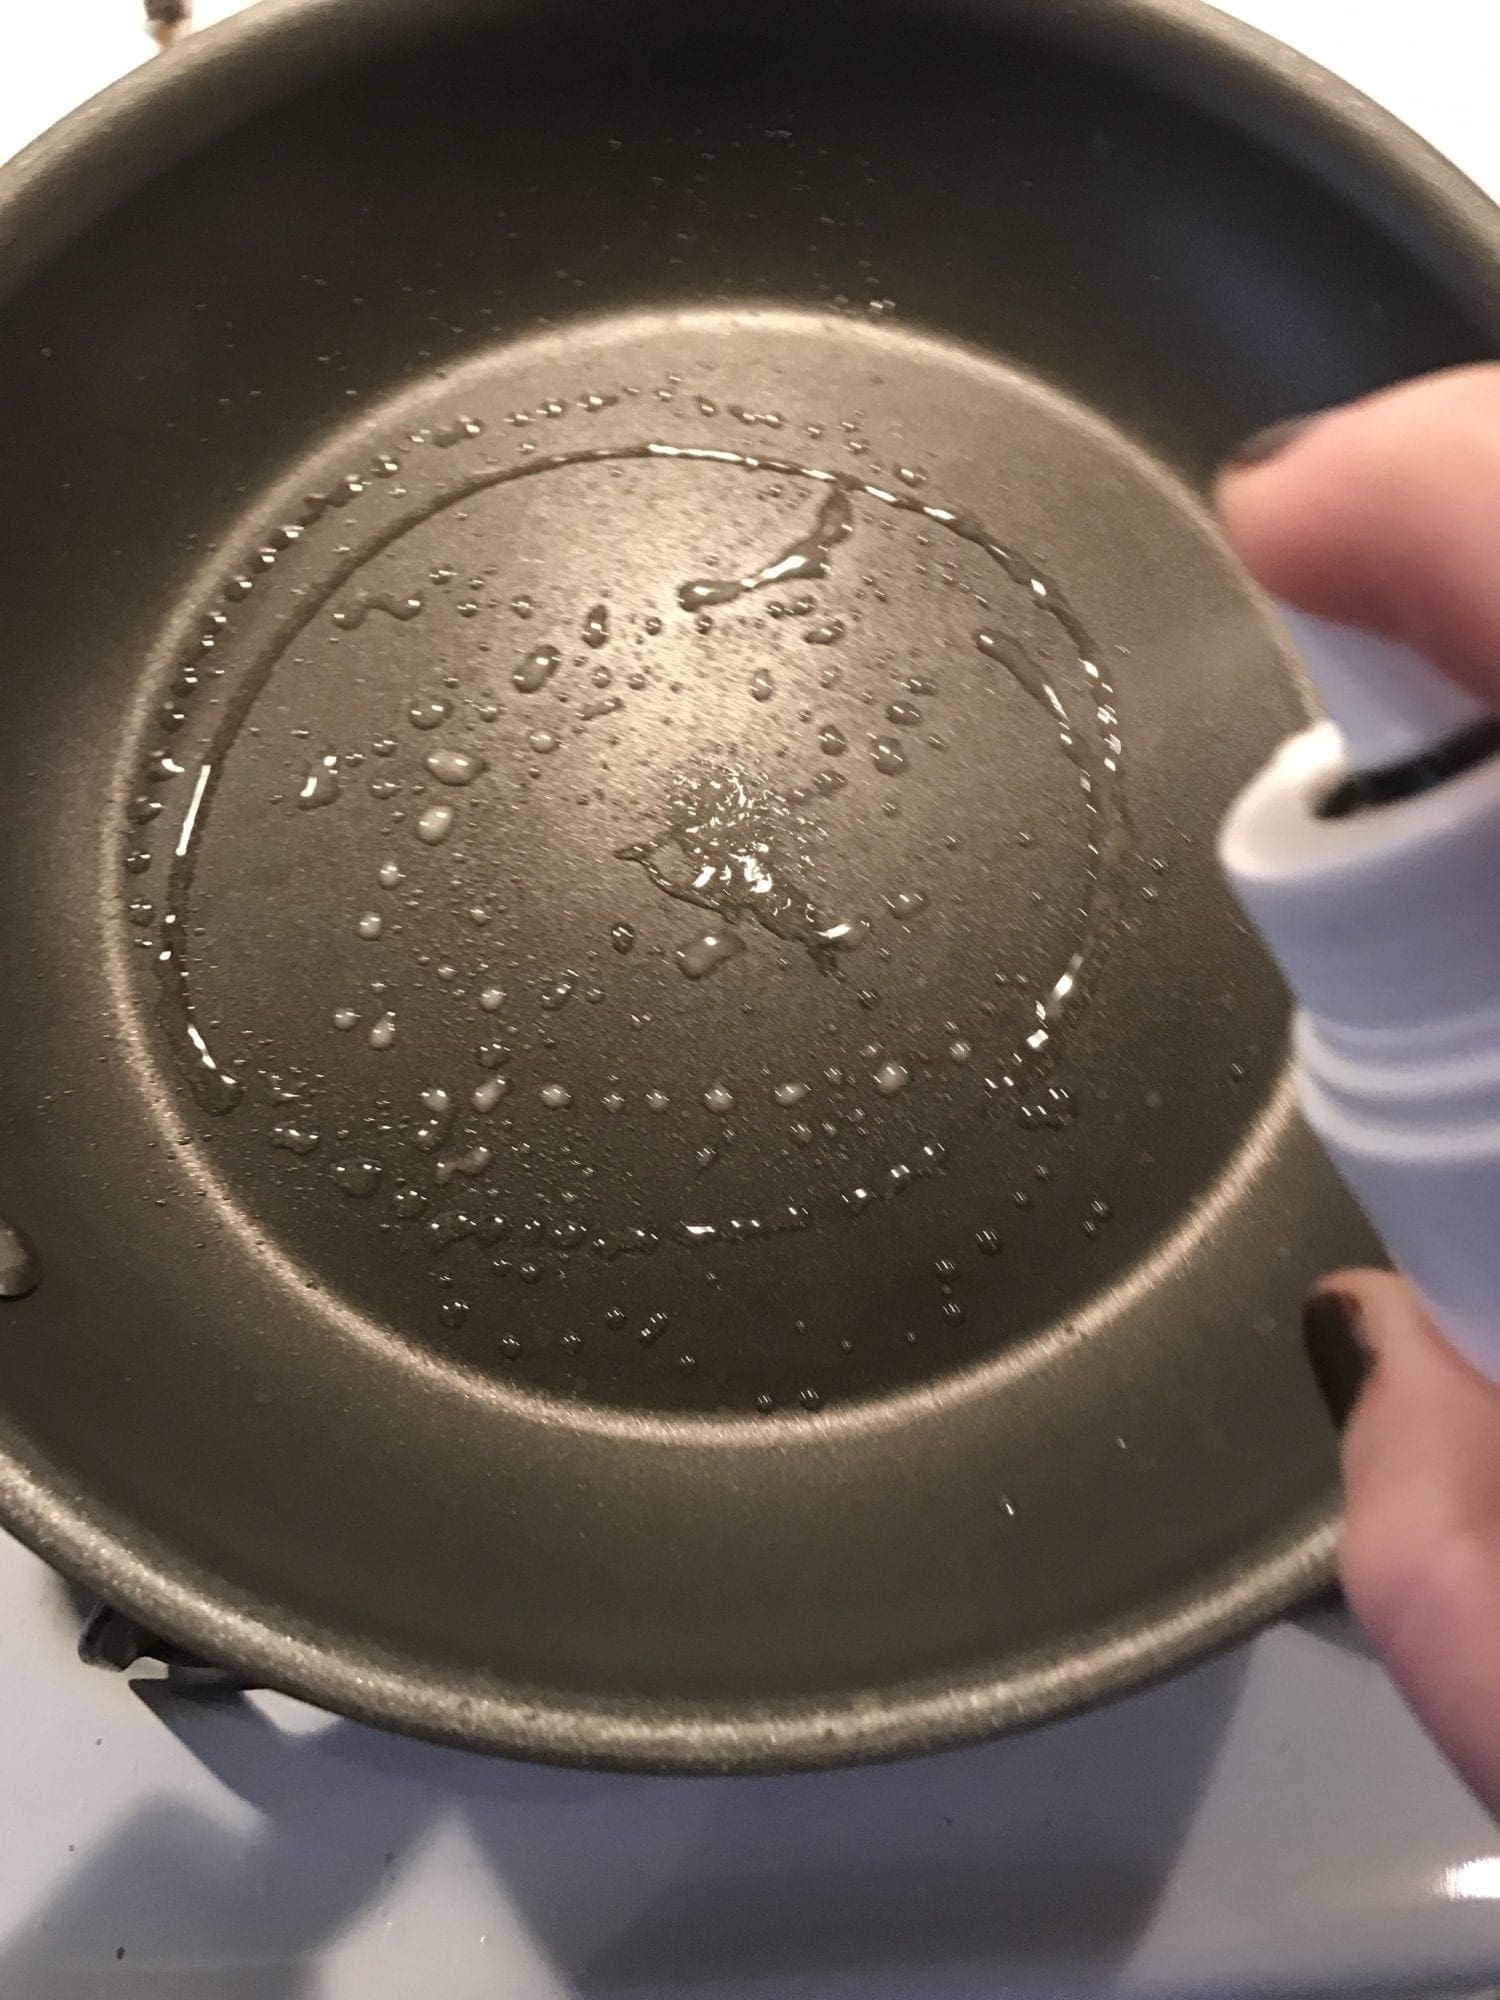 Spray pan with cooking spray